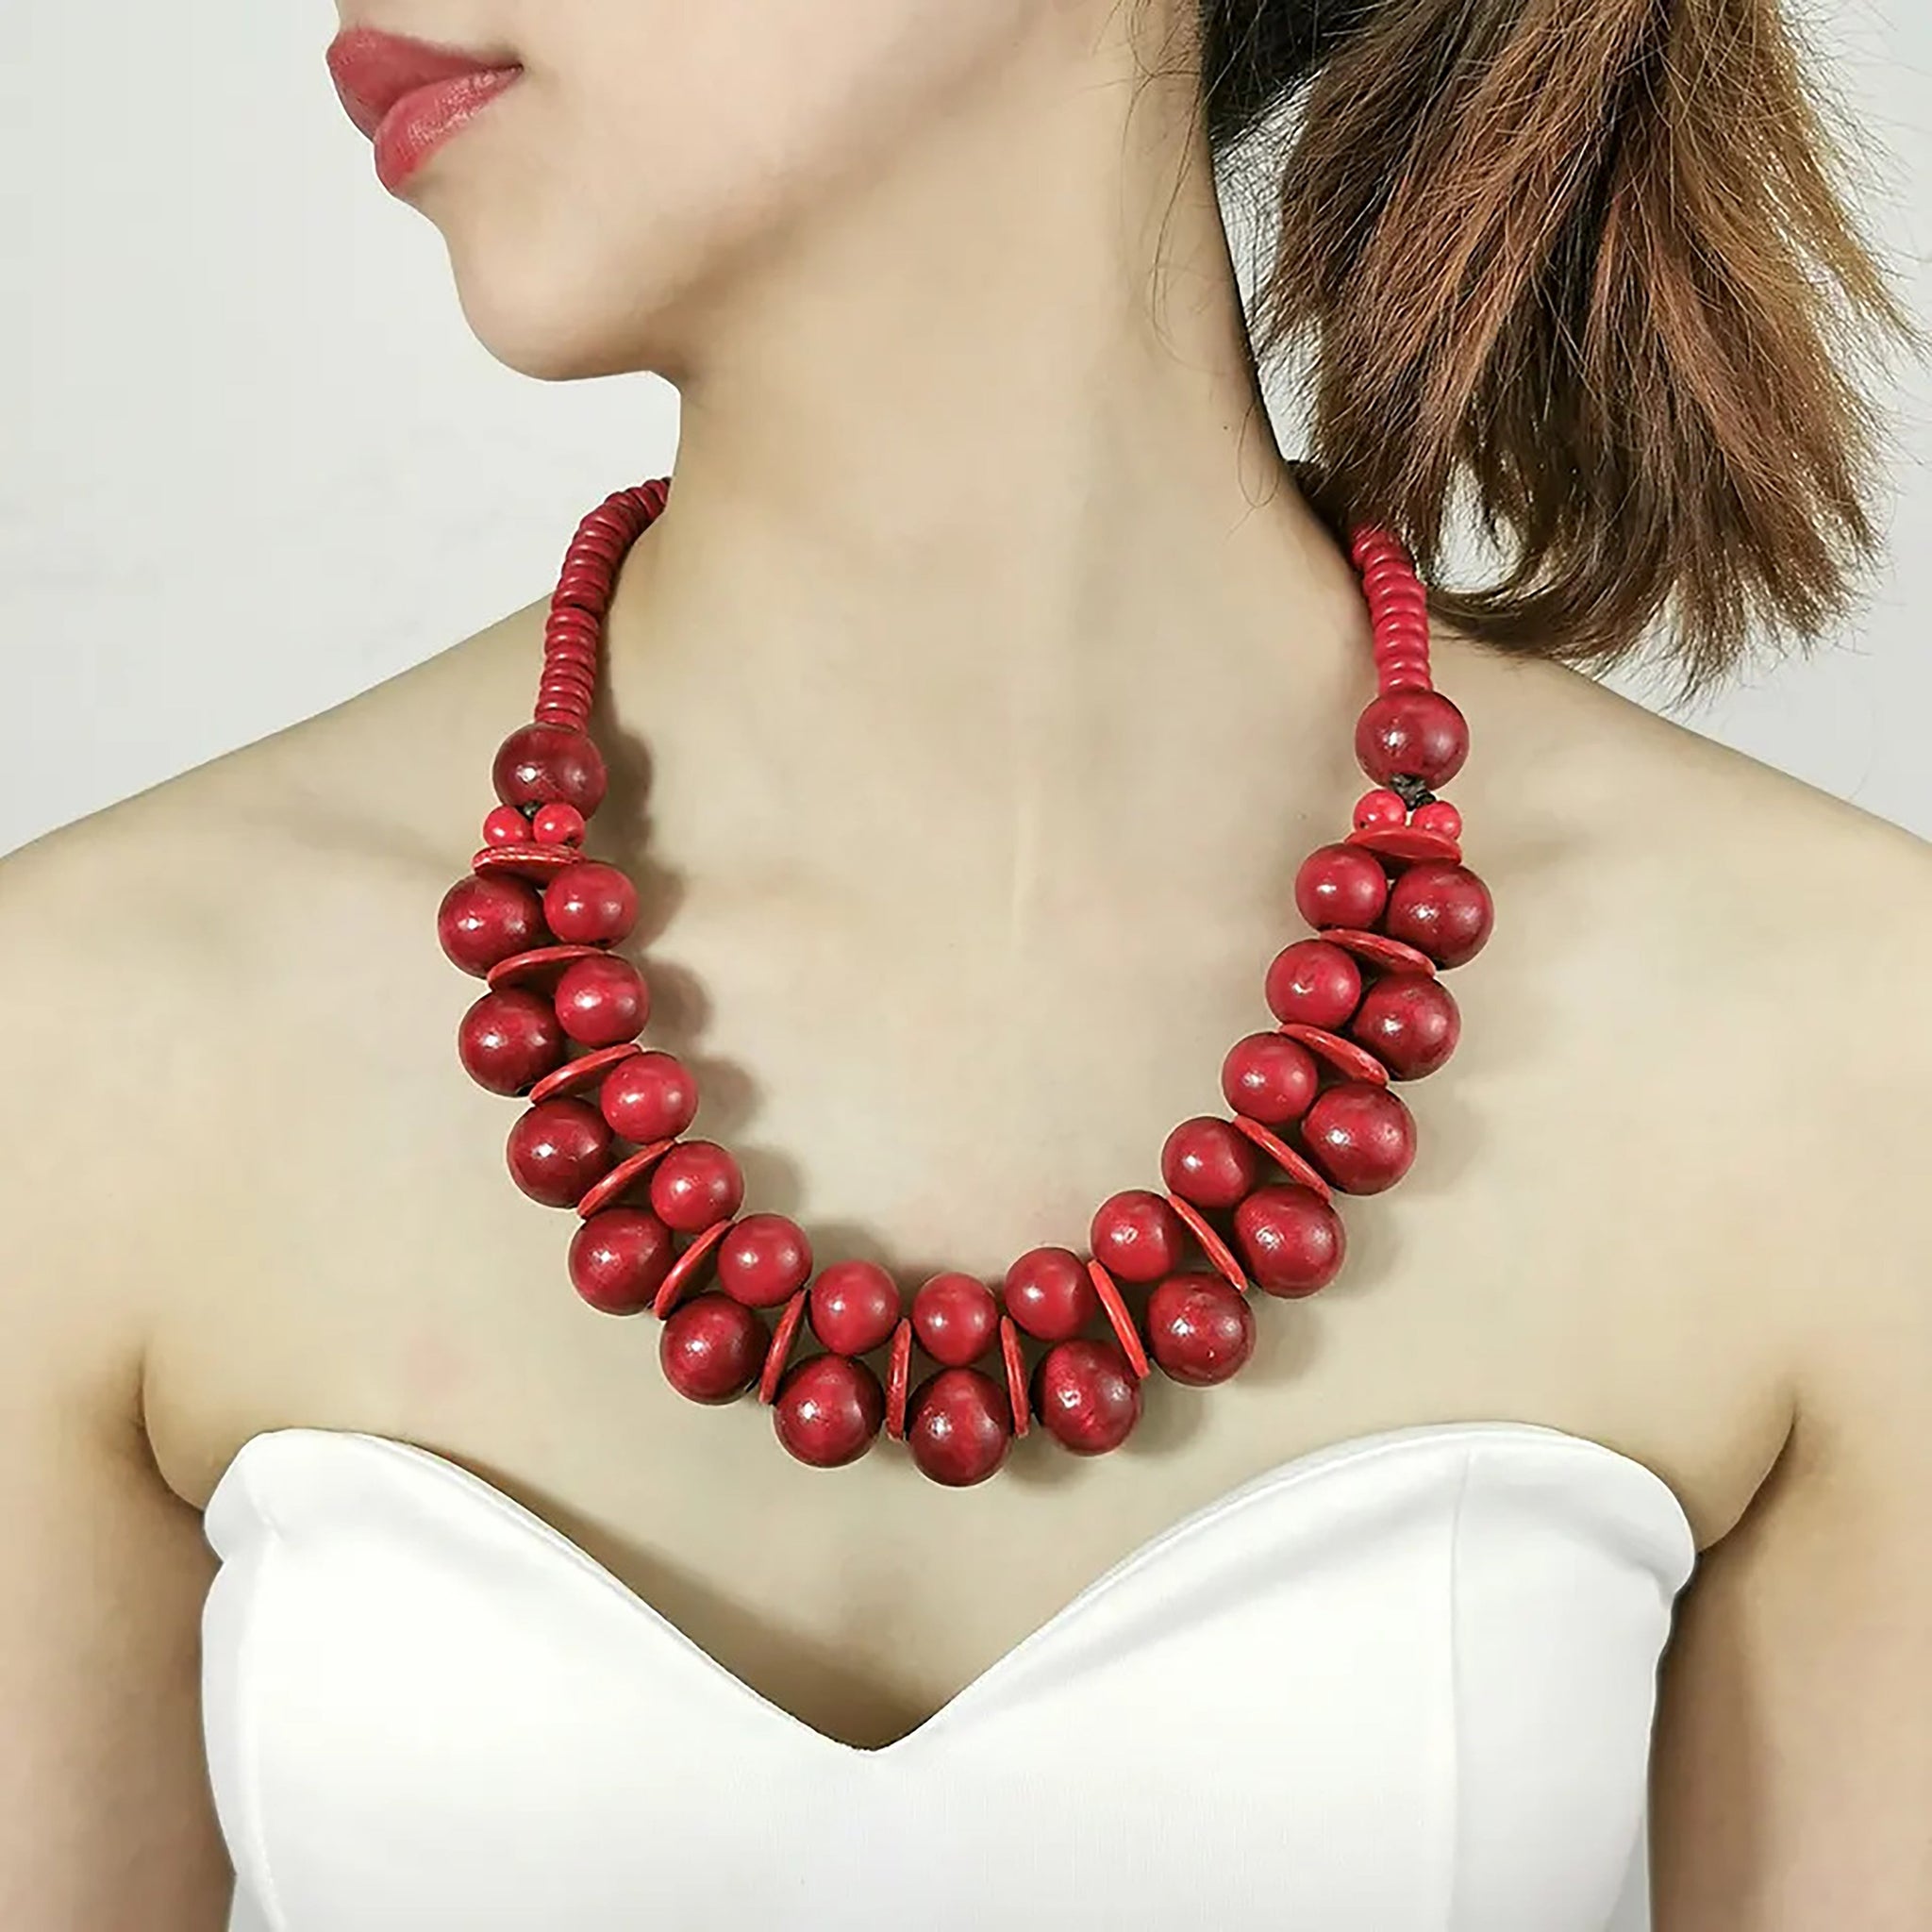 Chokore Chunky Bead Necklace (Red)